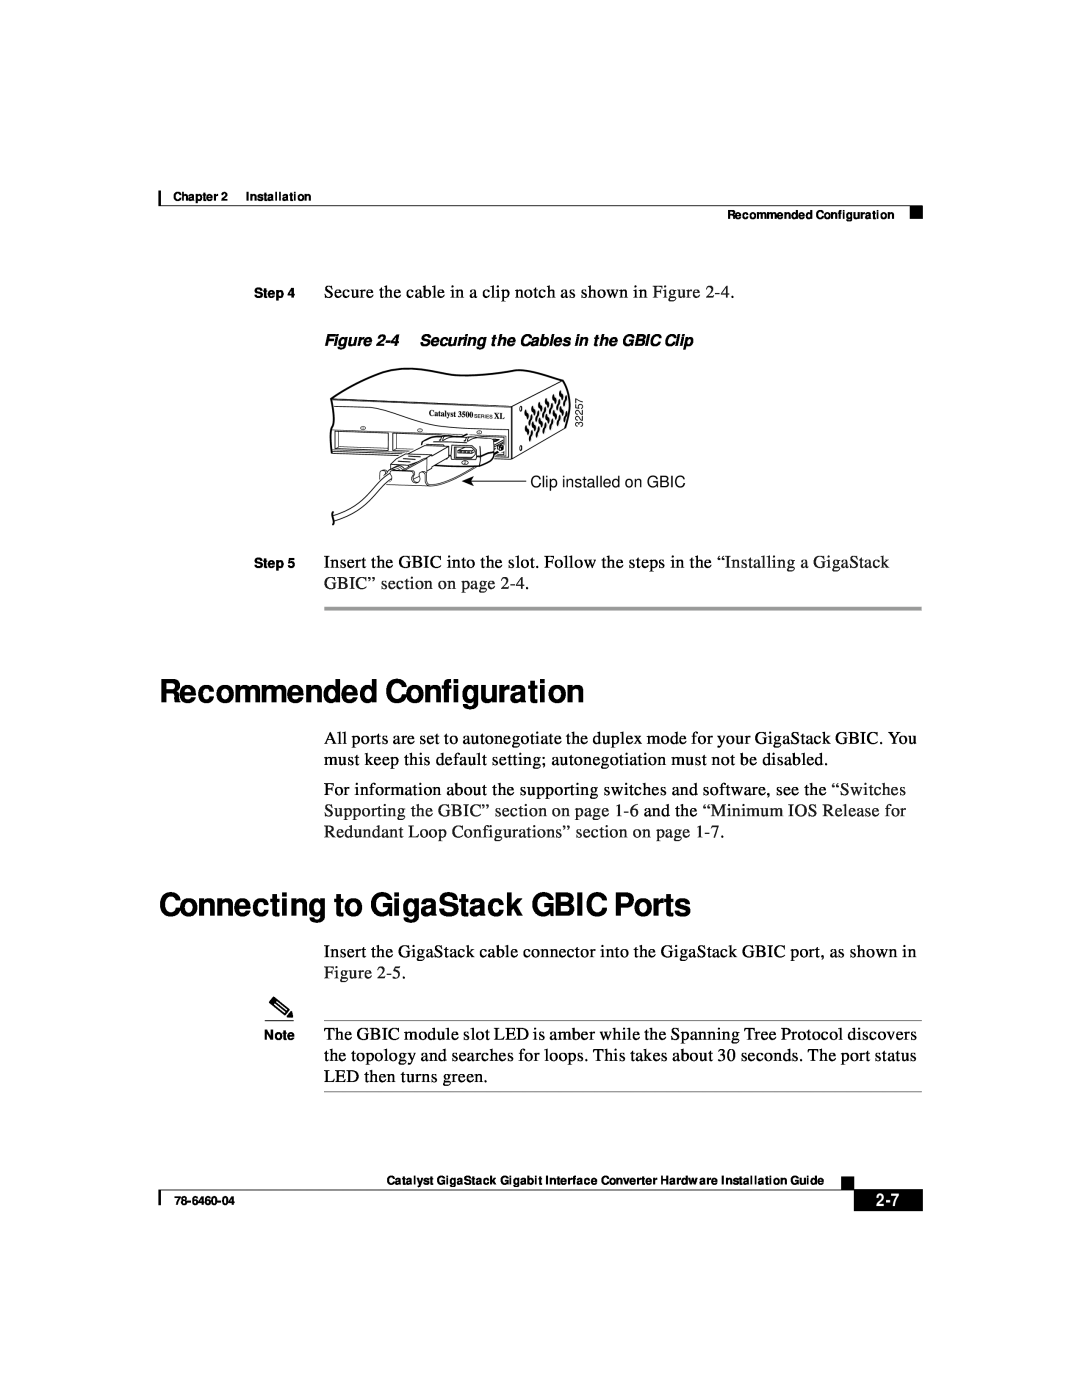 Cisco Systems WS-X3500-XL manual Recommended Configuration, Connecting to GigaStack GBIC Ports 